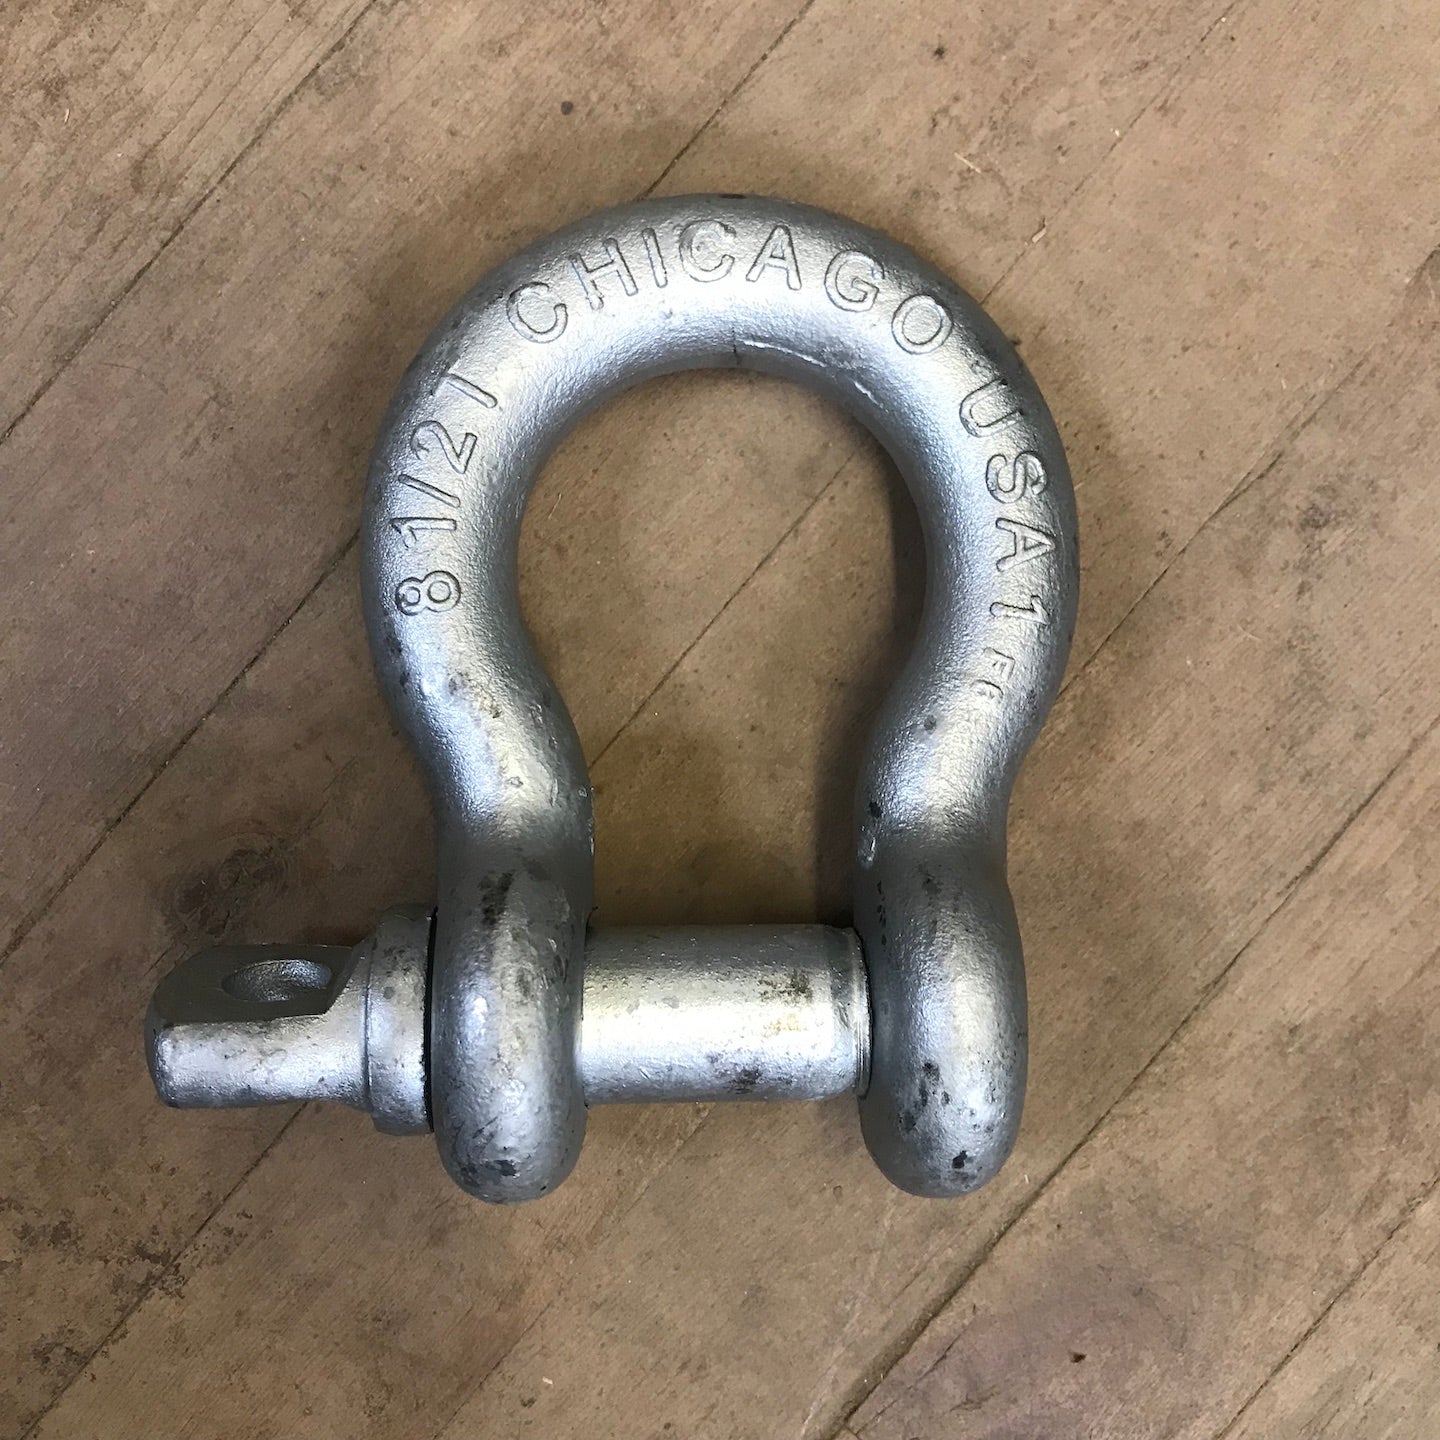 Chicago Hardware 1" Galvanized Anchor Screw Pin Shackle (20150-6)